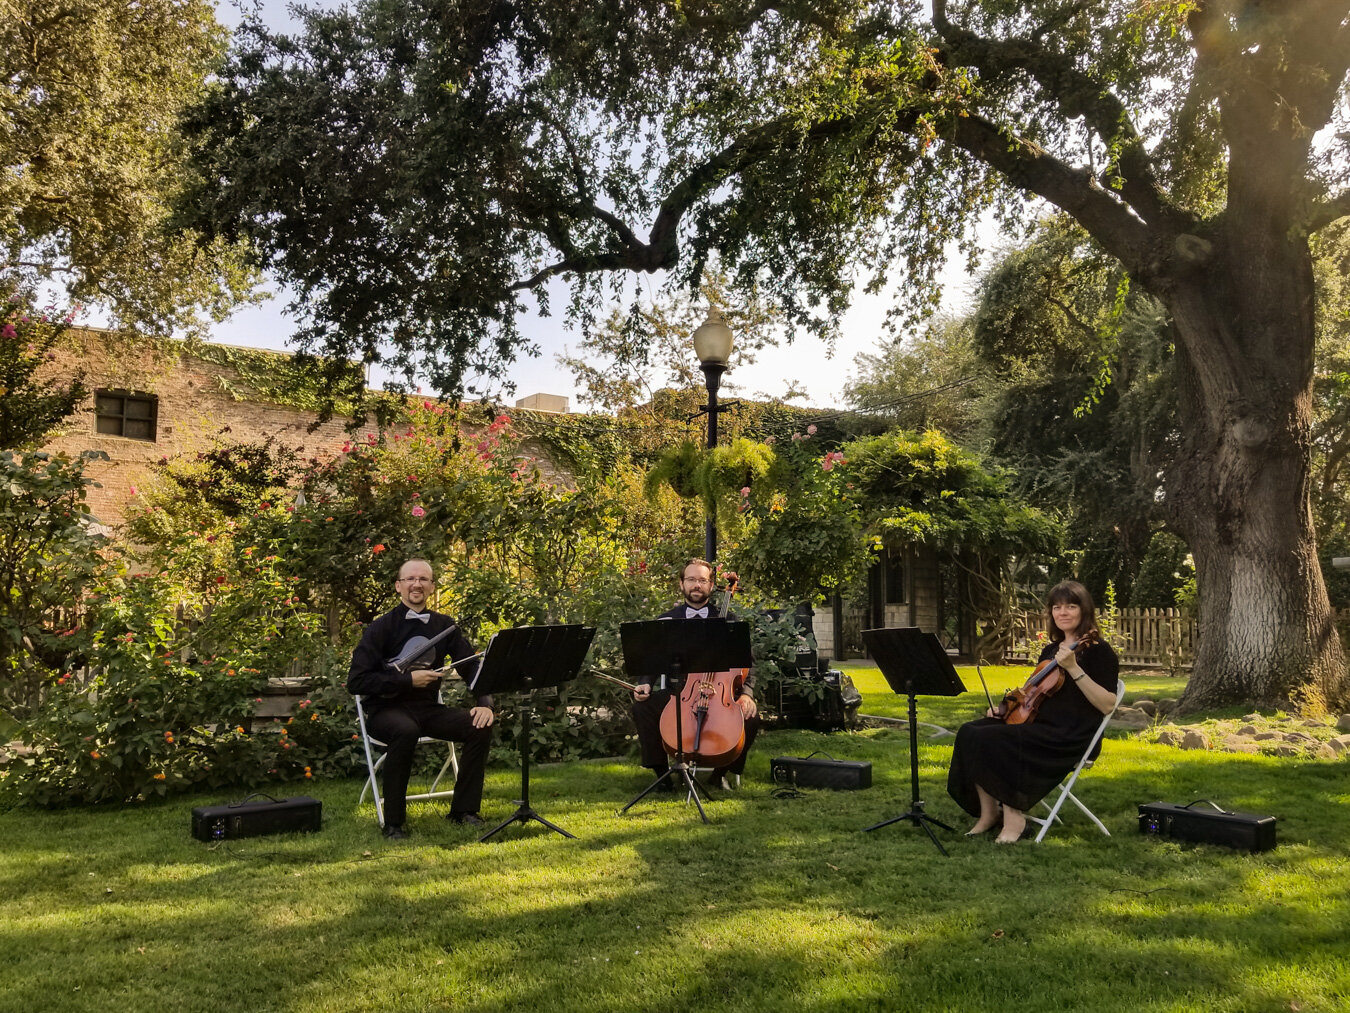 Trio Maxim performing at The River Mill in French Camp, CA. If you have not been there check them out at @therivermillfrenchcamp. It is a wonderful place! #triomaxim #weddingtrio #weddingmarch #fairfieldtrio #weddingmusic #violin #cello #carbonfiberv